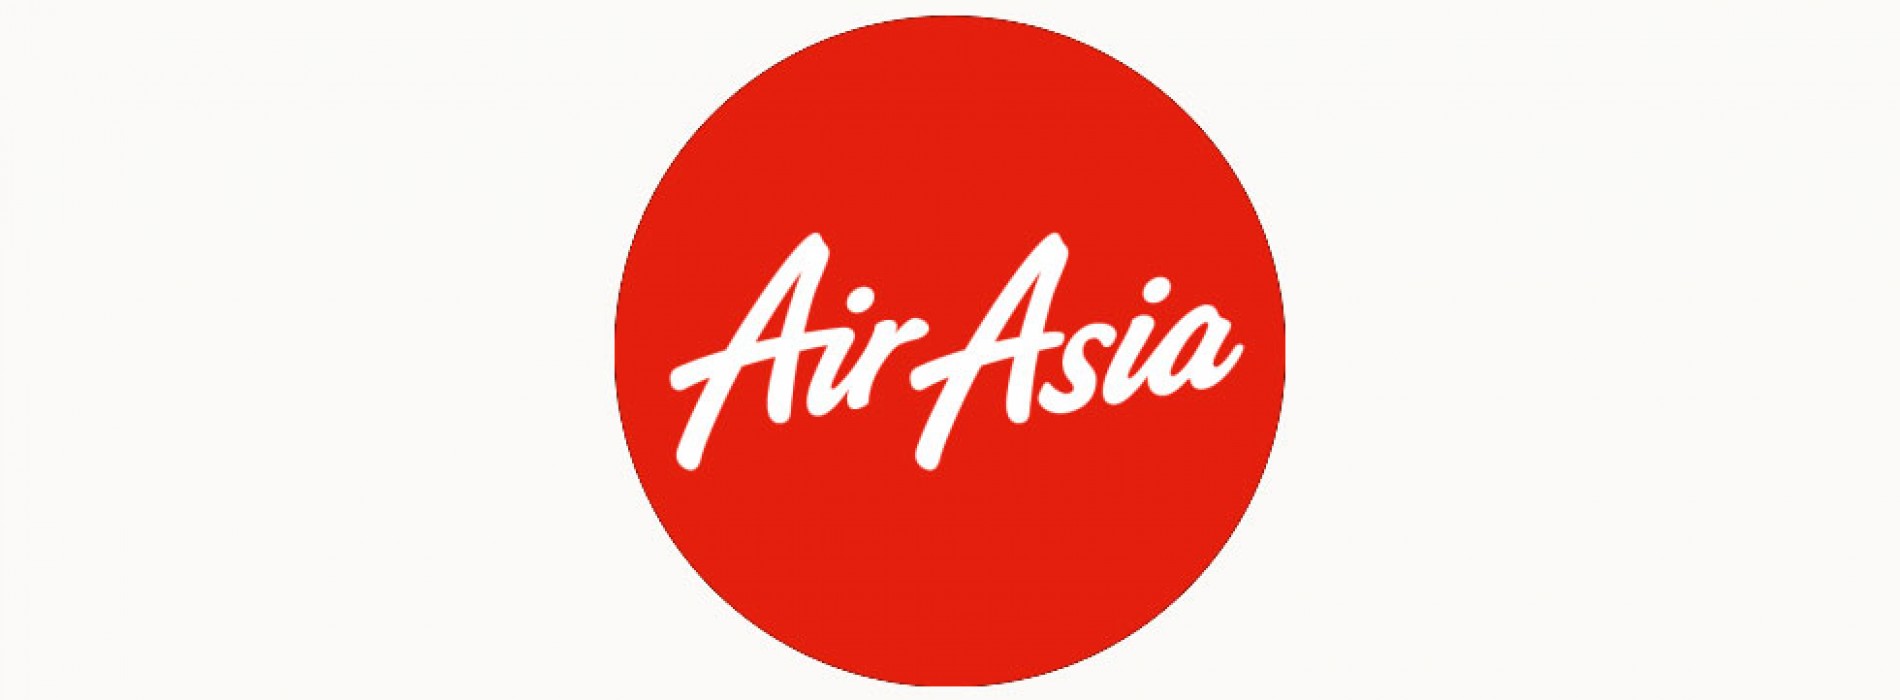 AirAsia & AirAsia X offer the best travel plans for everyone!